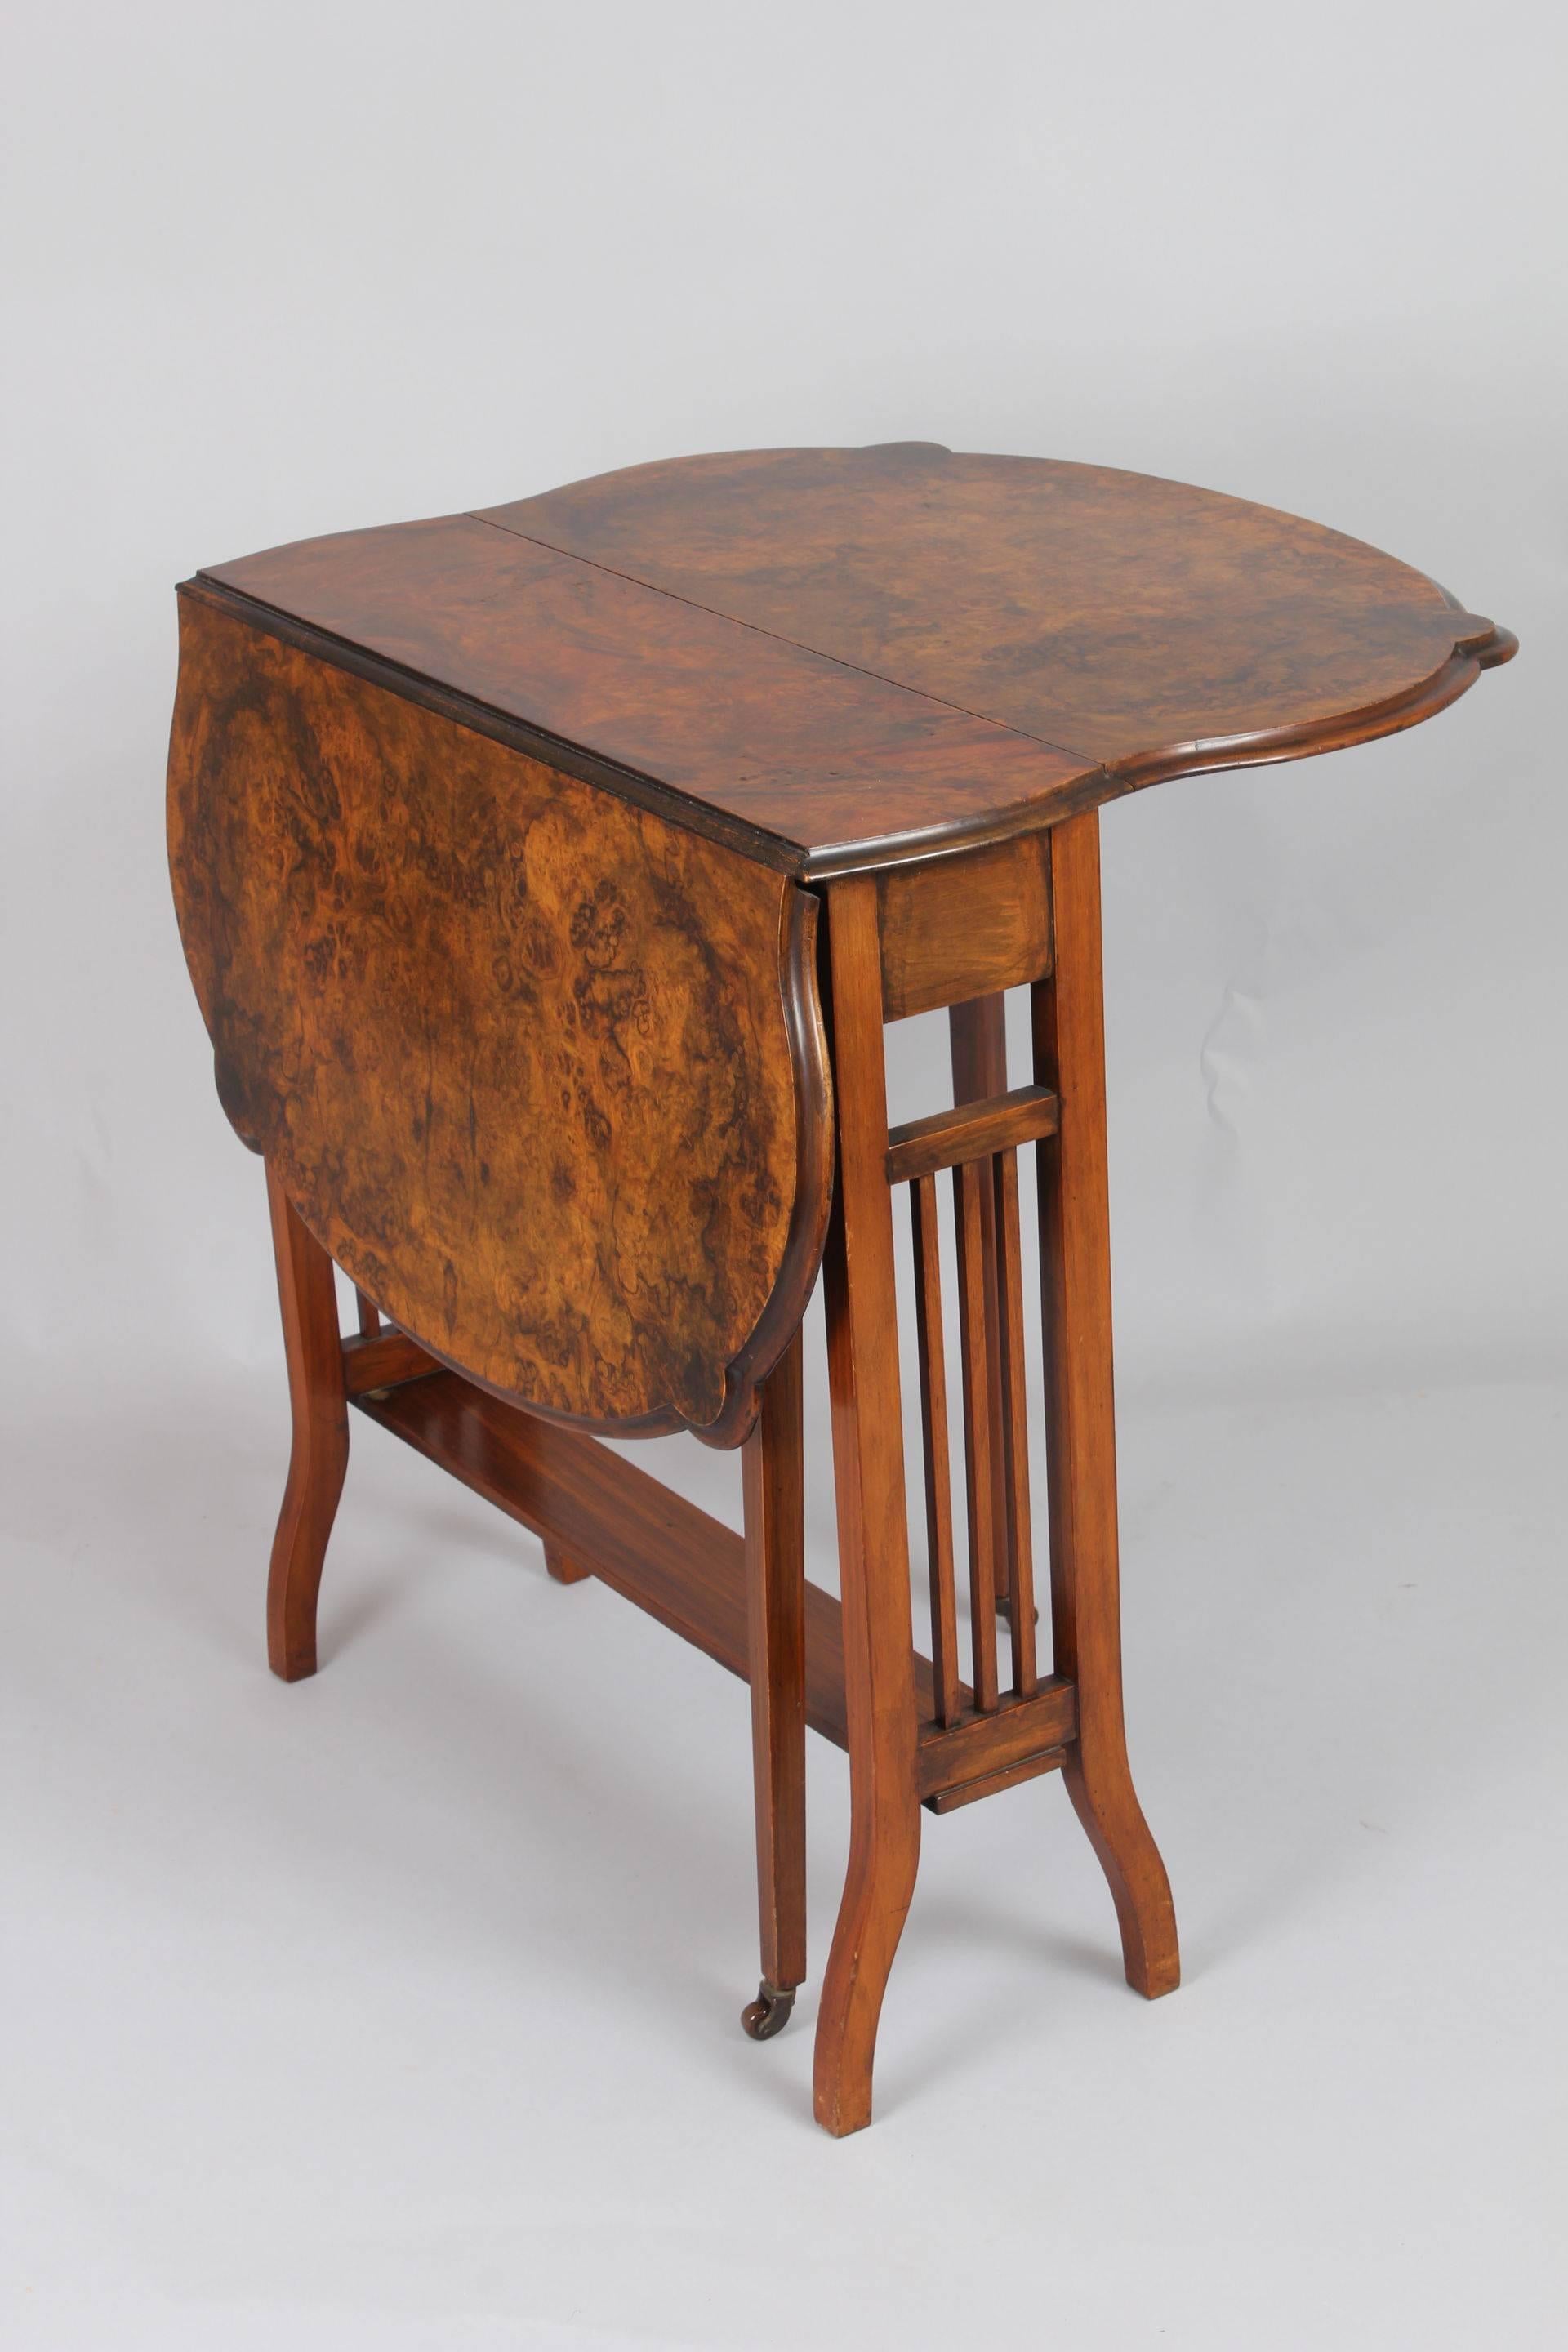 Edwardian walnut Sutherland table; the shaped top with matched burr veneers, on agate-leg frame with slatted end-standards.